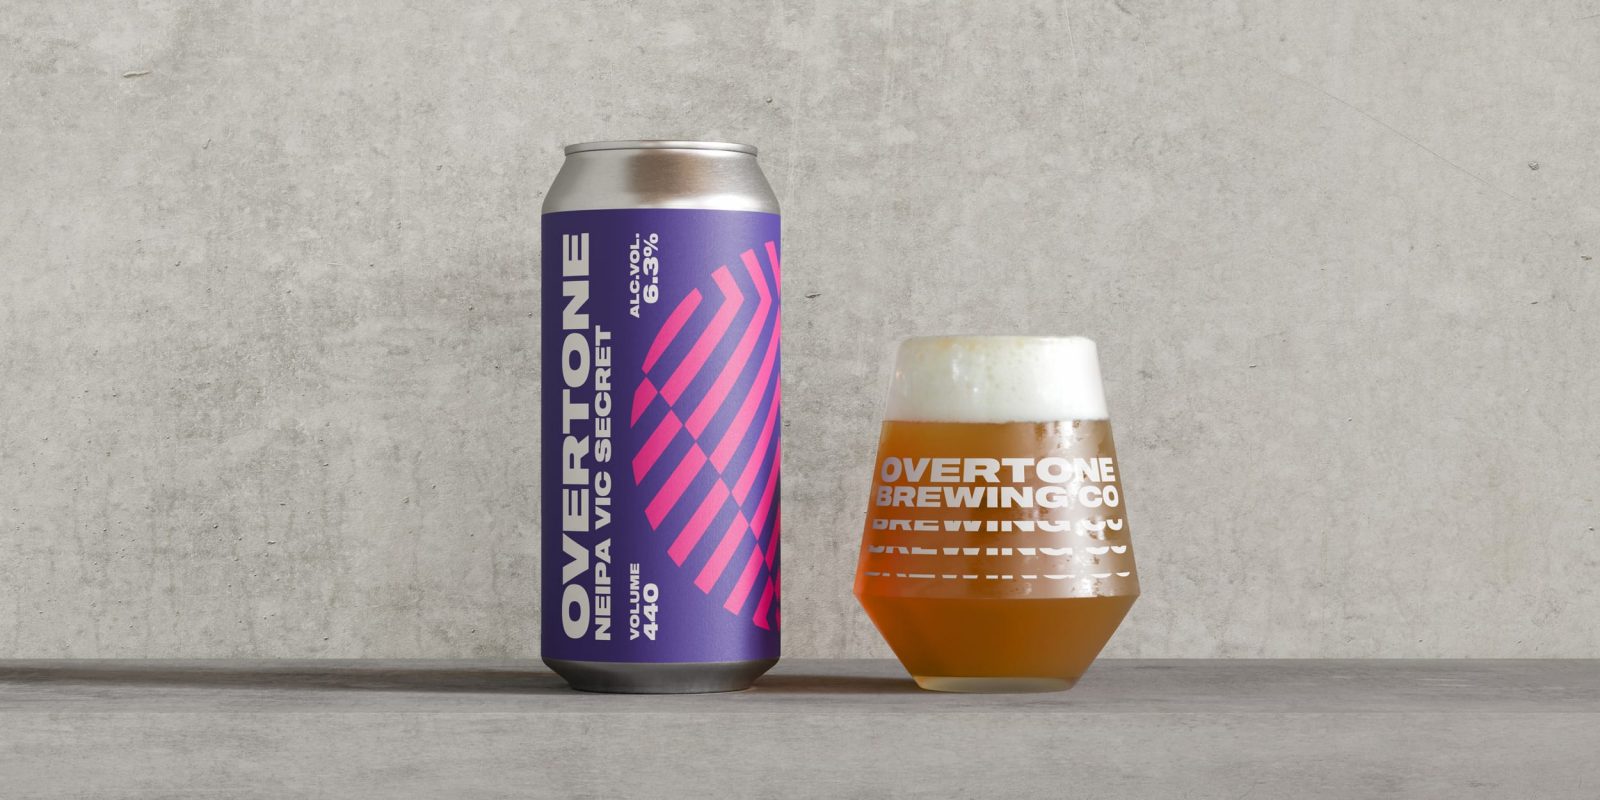 Thirst Craft Put Overtone Into Overdrive With a Club Scene Inspired New Brand